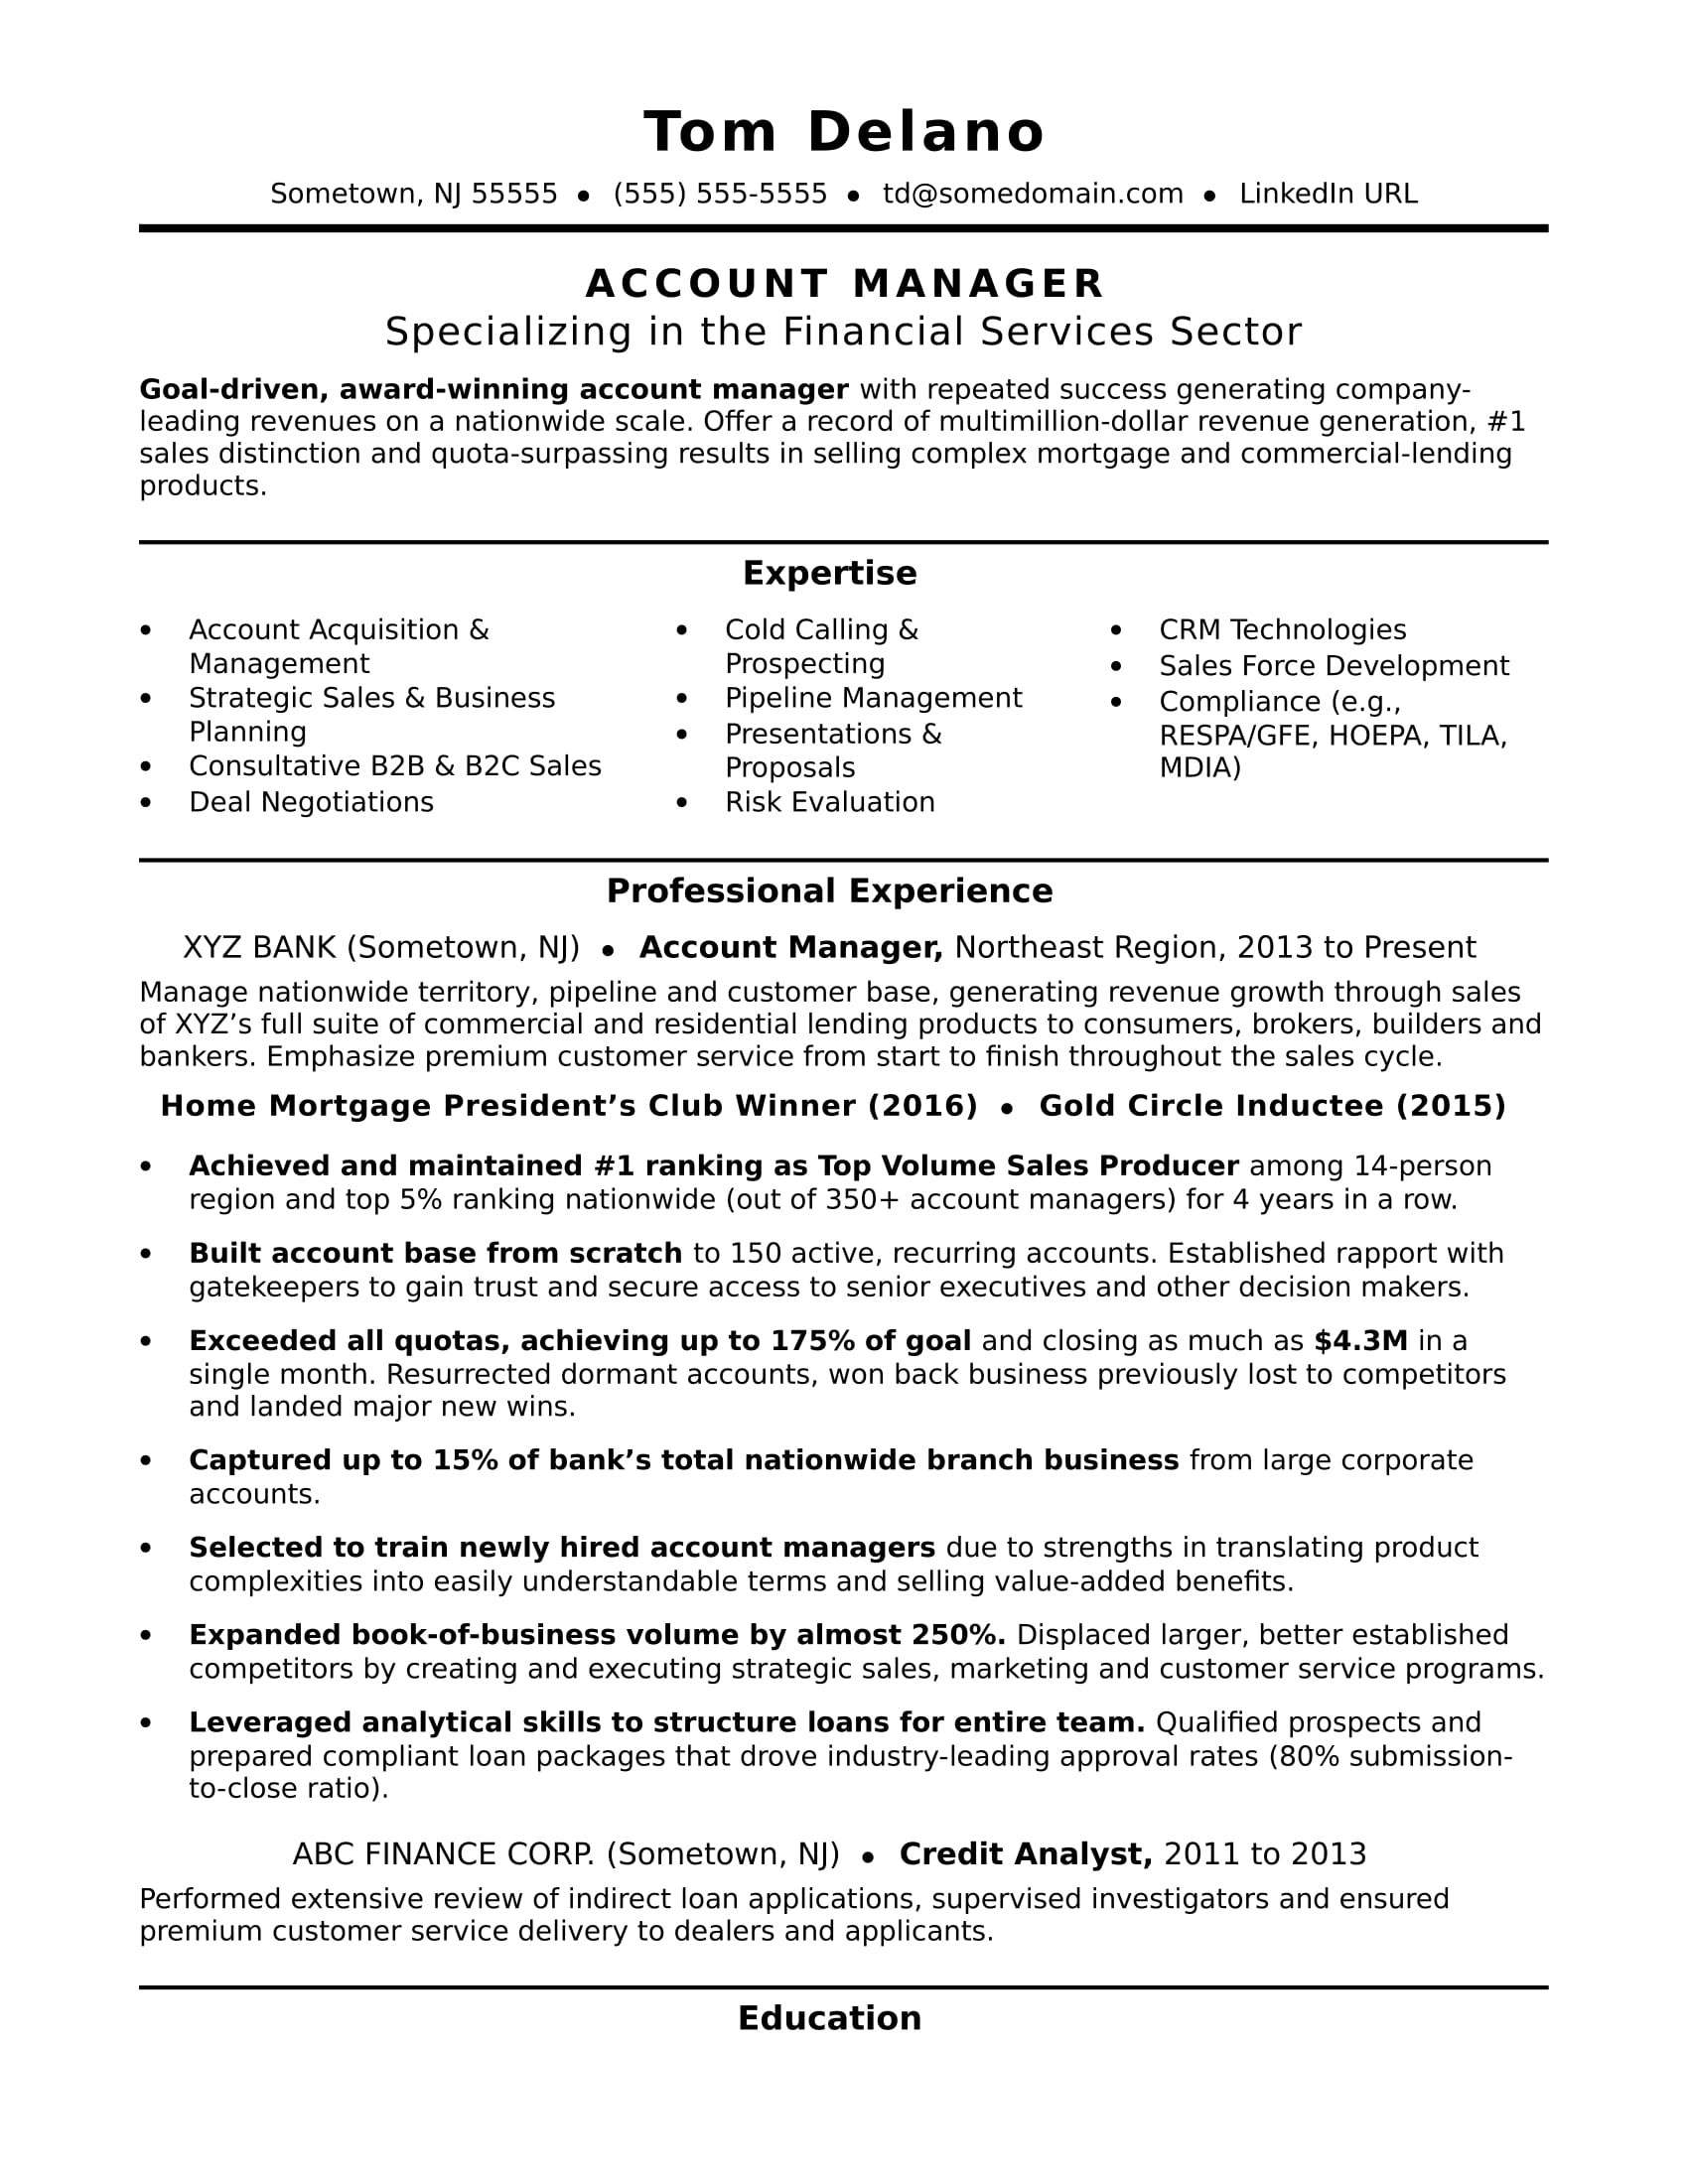 Sample Resume for Account Manager Position Account Manager Resume Sample